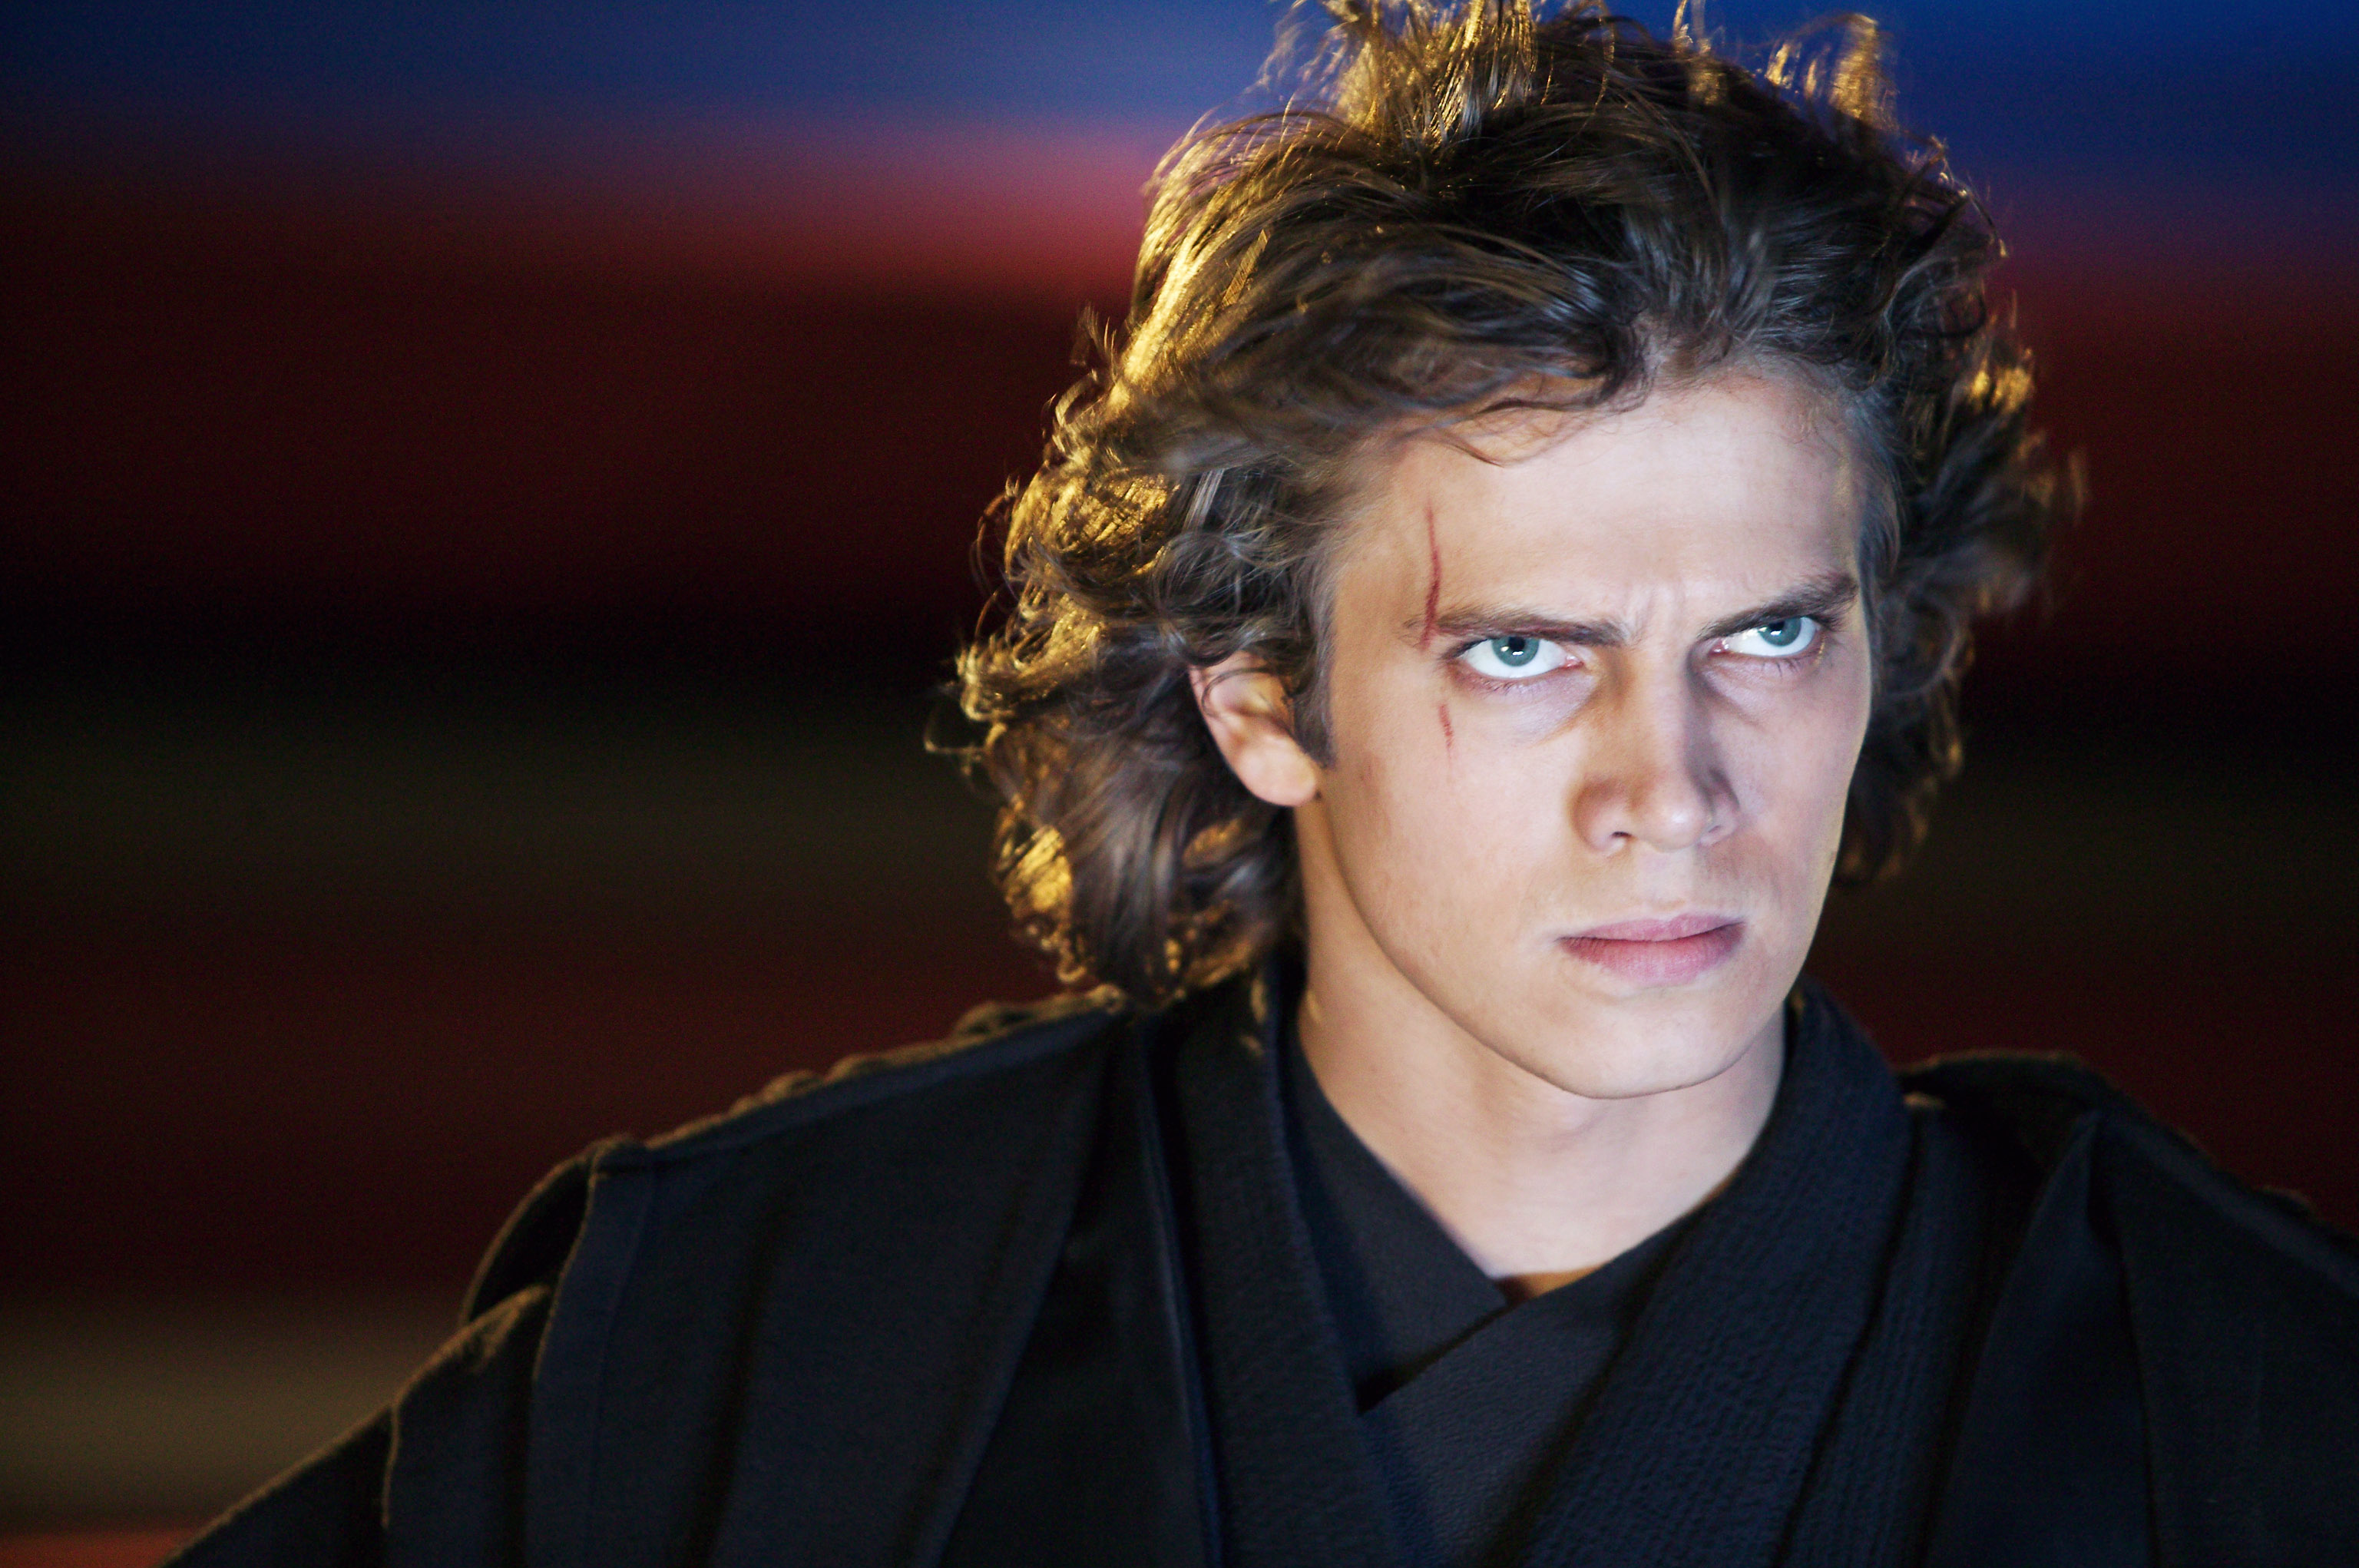 hayden christensen thought he'd lose ‘star wars' role once he heard leonardo dicaprio met with lucasfilm: playing anakin ‘just wasn't a possibility'